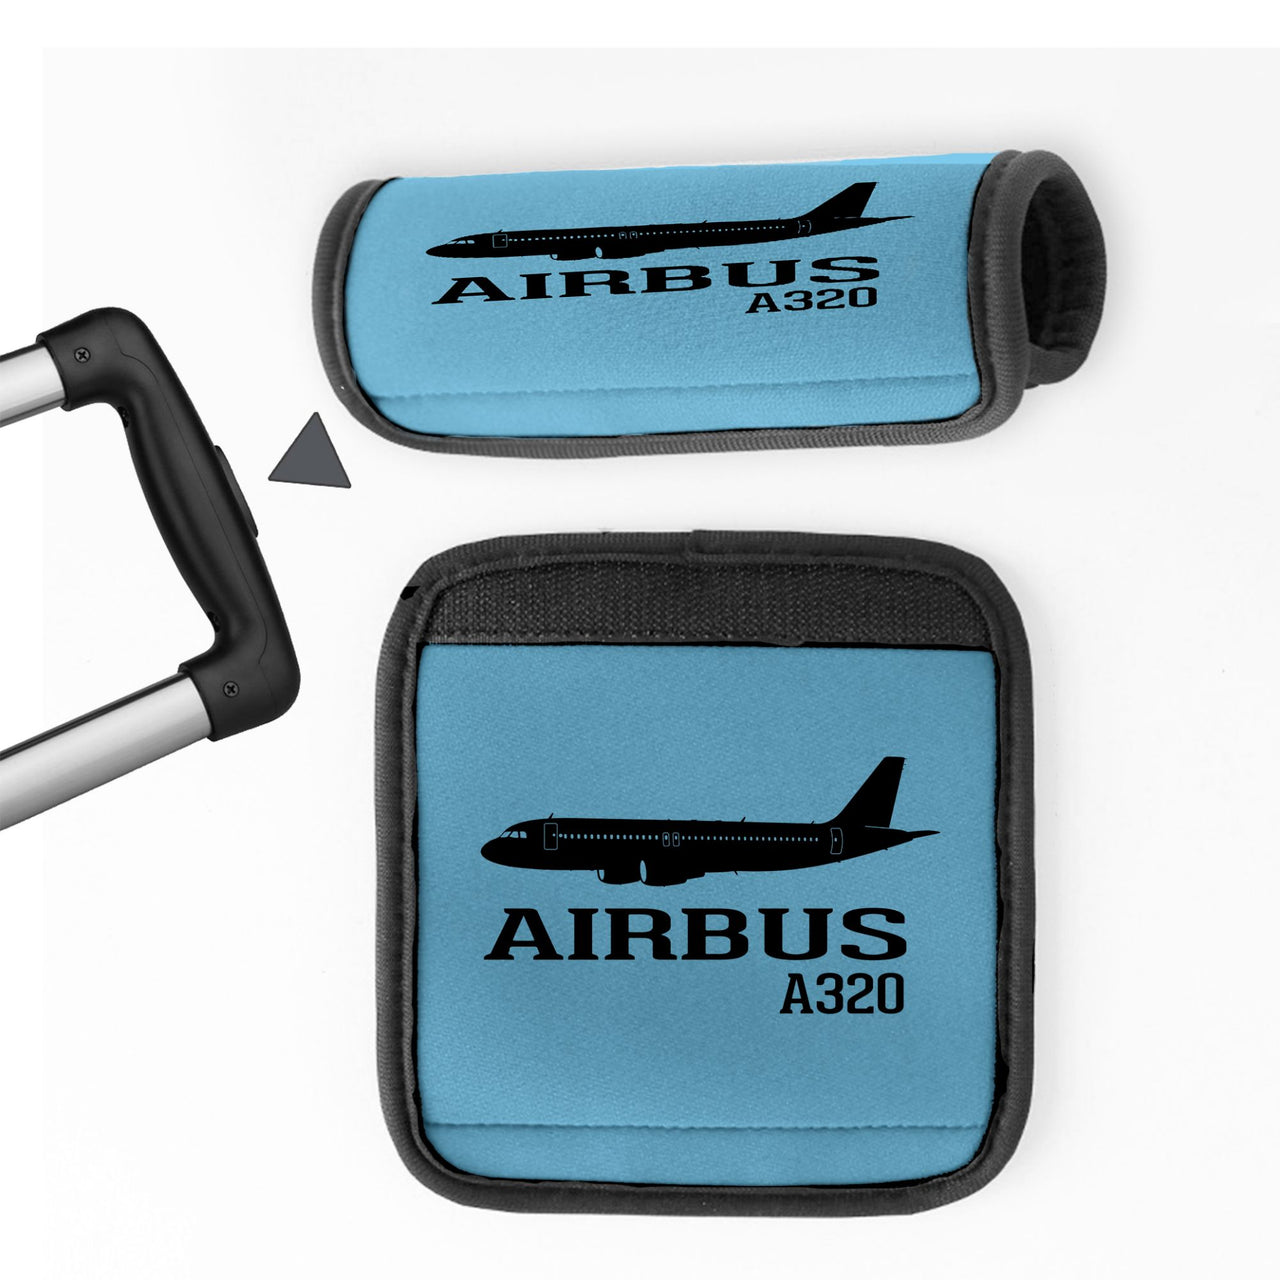 Airbus A320 Printed Designed Neoprene Luggage Handle Covers